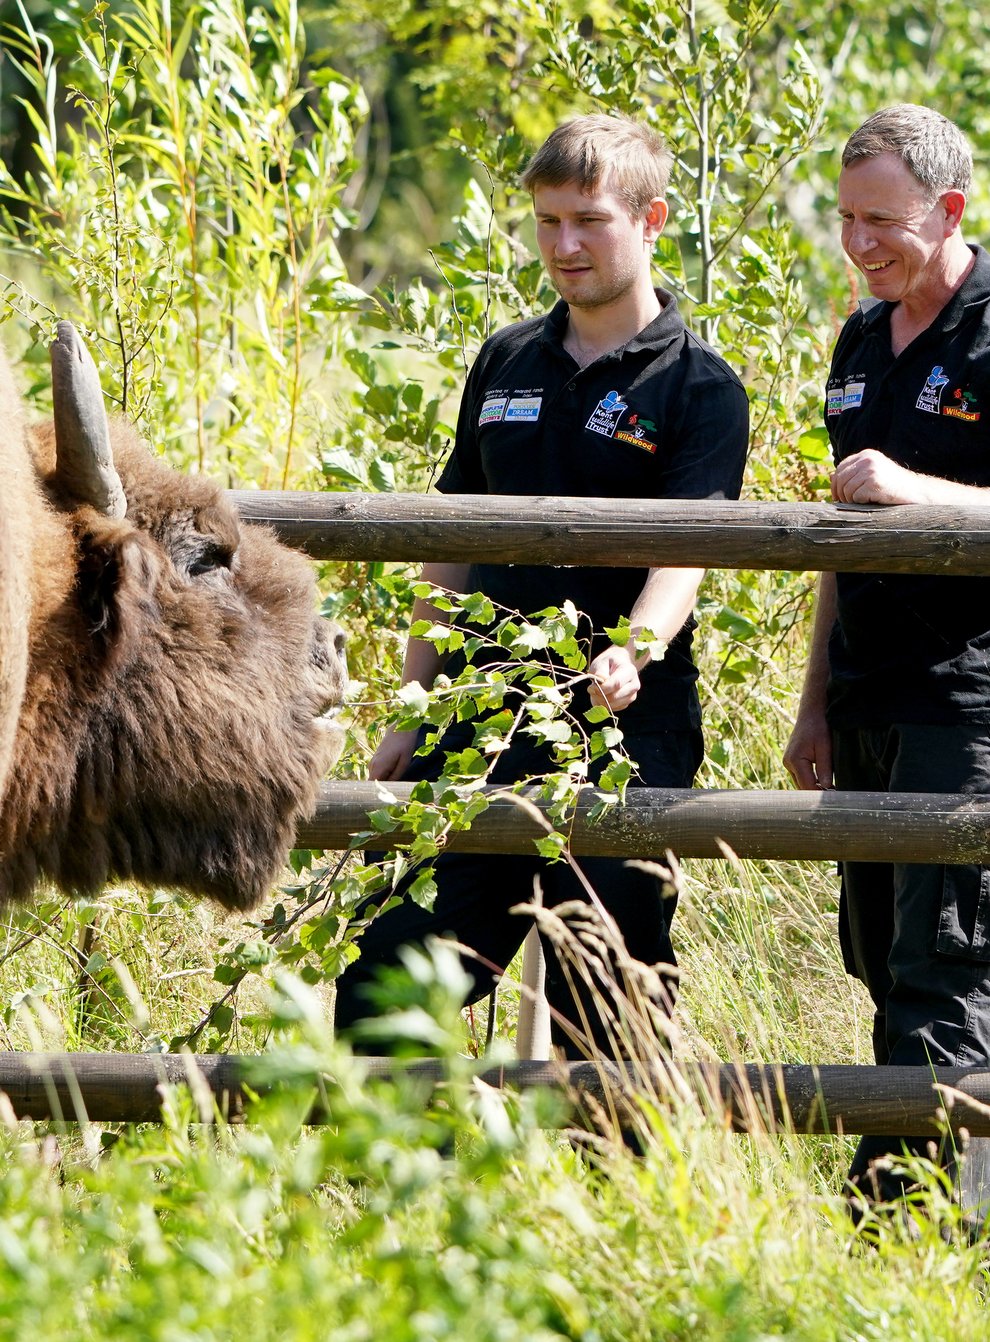 Tom Gibbs (left) and Donovan Wright, the UK’s first-ever bison rangers, get to know a bison (Gareth Fuller/PA)